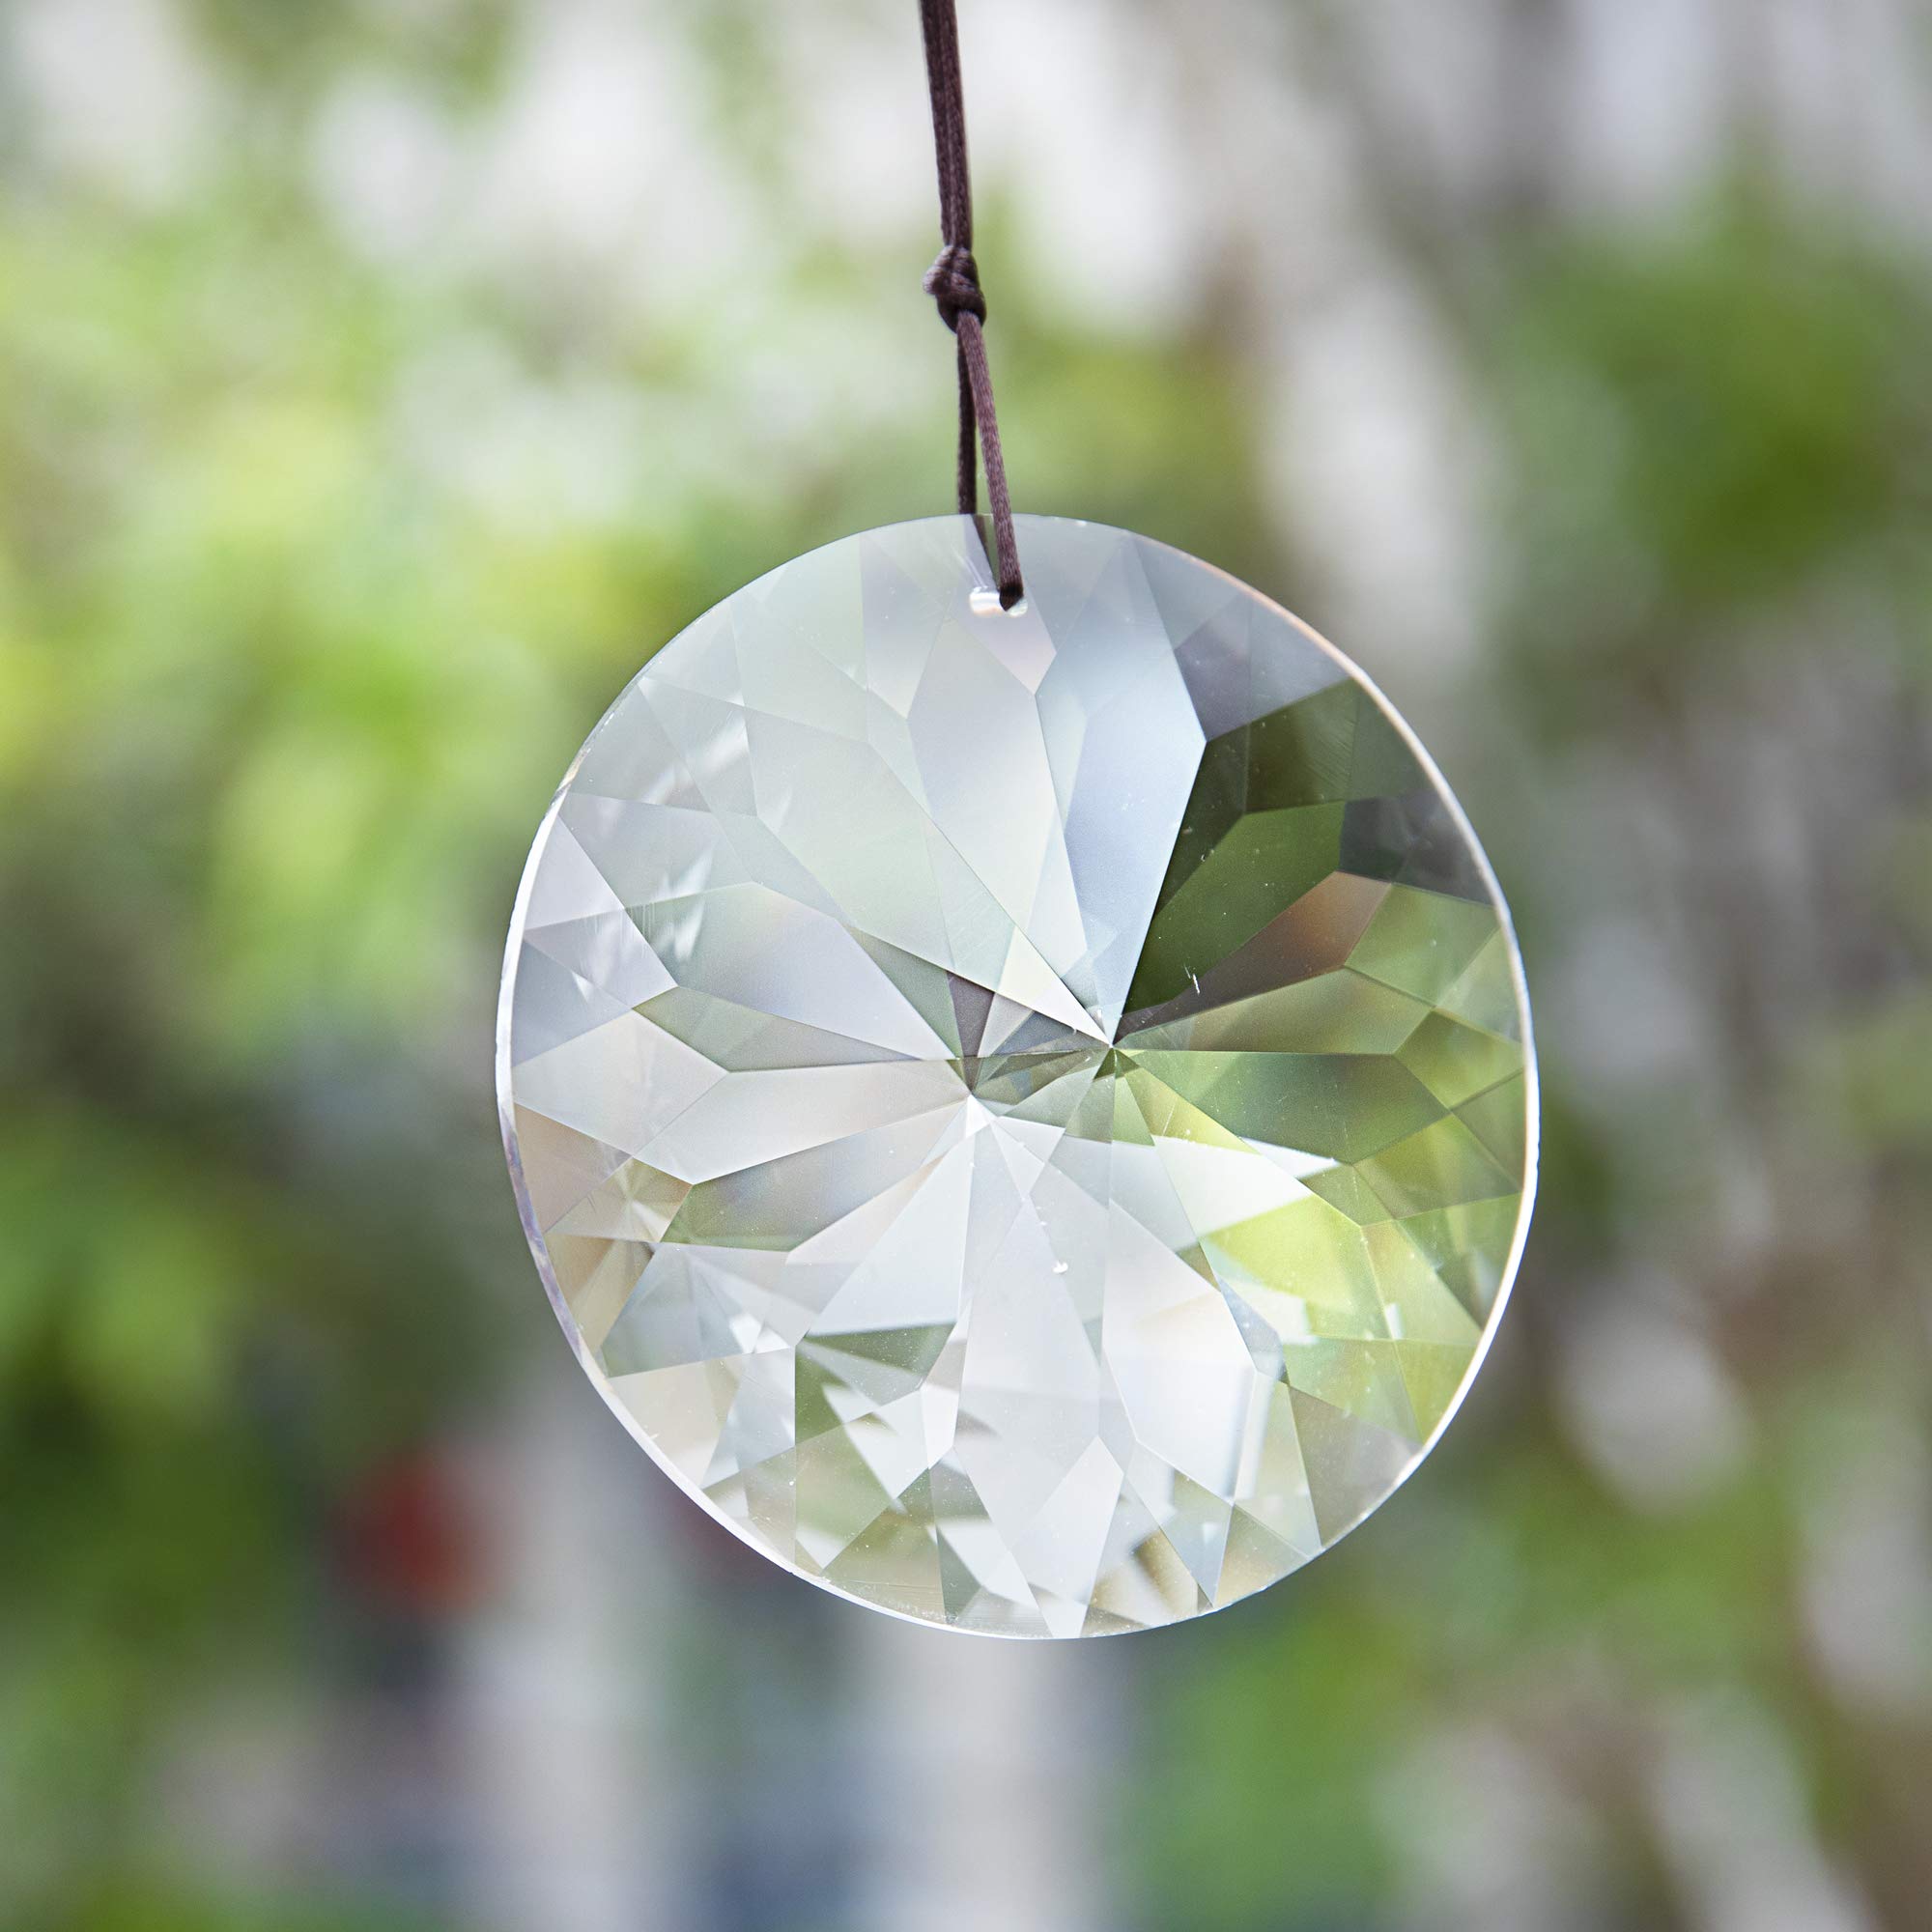 Bauhinia Hanging Faceted Crystals Large Window Prisms Suncatcher Ornament Rainbow Maker Chandelier Crystal Pendant(85mm,Round)